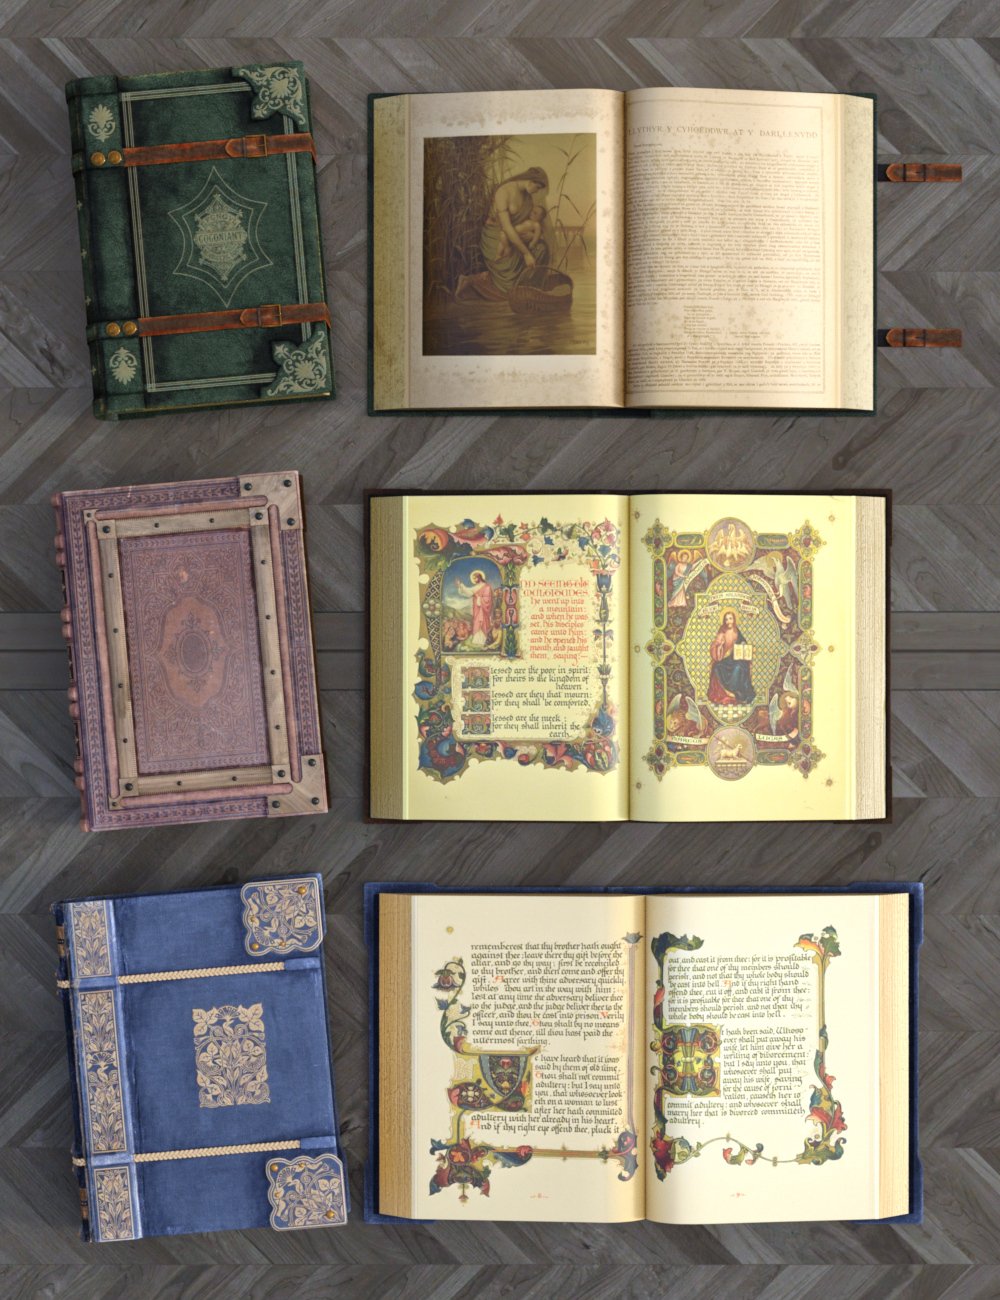 Sacred Texts by: Merlin Studios, 3D Models by Daz 3D